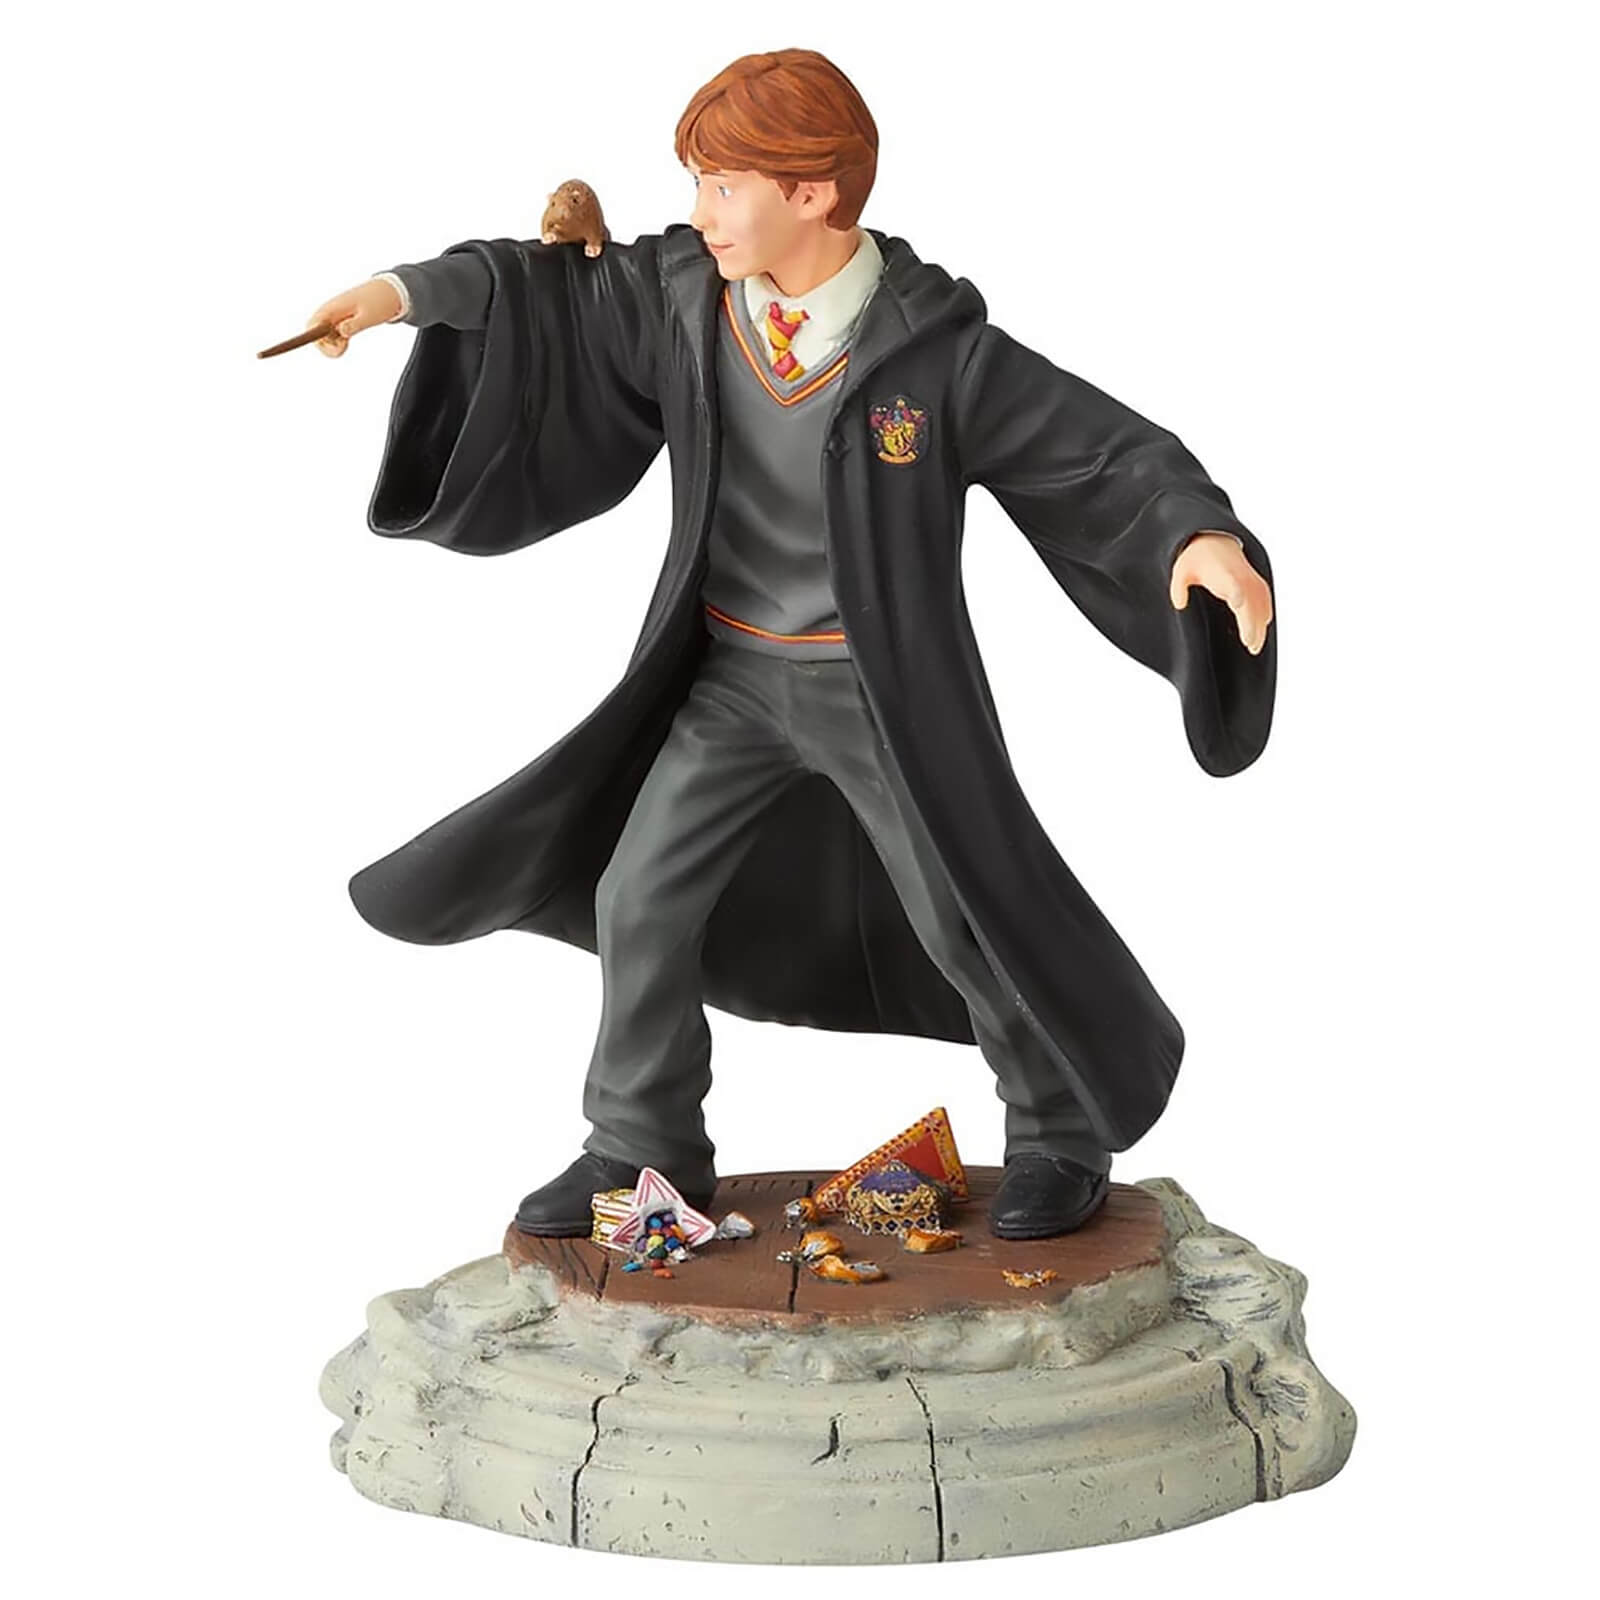 Image of The Wizarding World of Harry Potter Ron Weasley Year One Statue 19.0cm